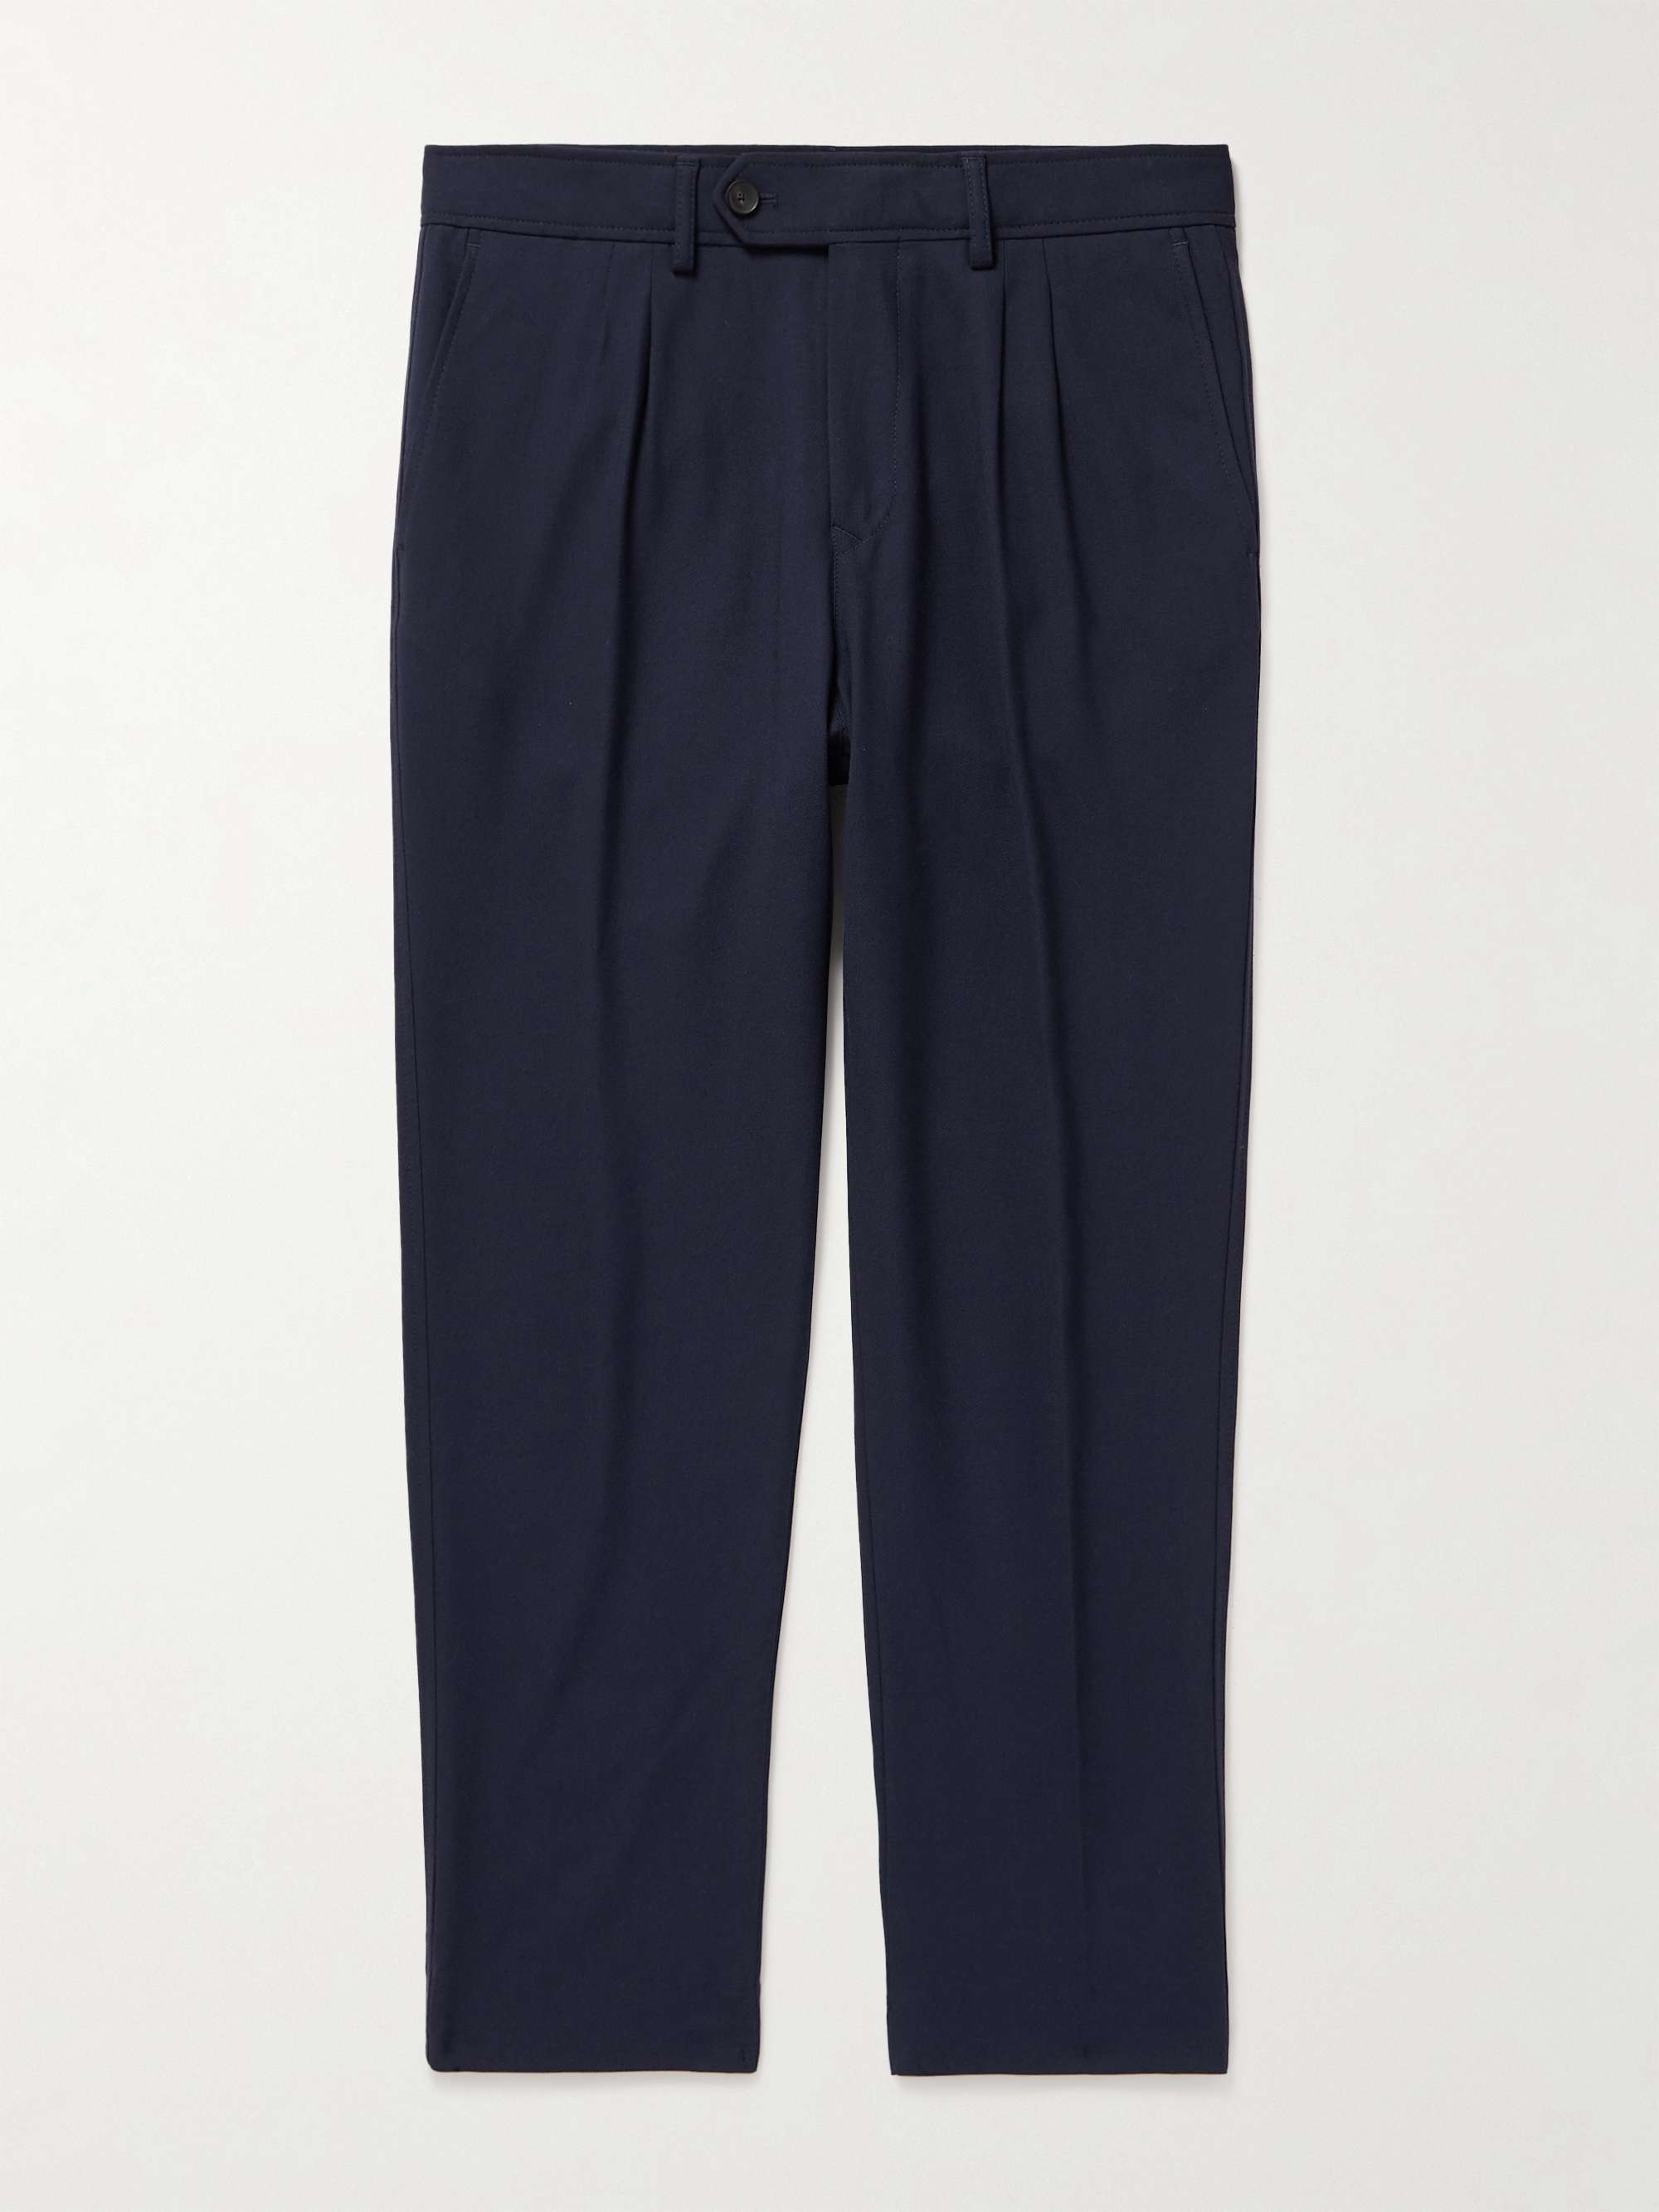 Zegna Pleated Wool Tapered Trousers - Farfetch